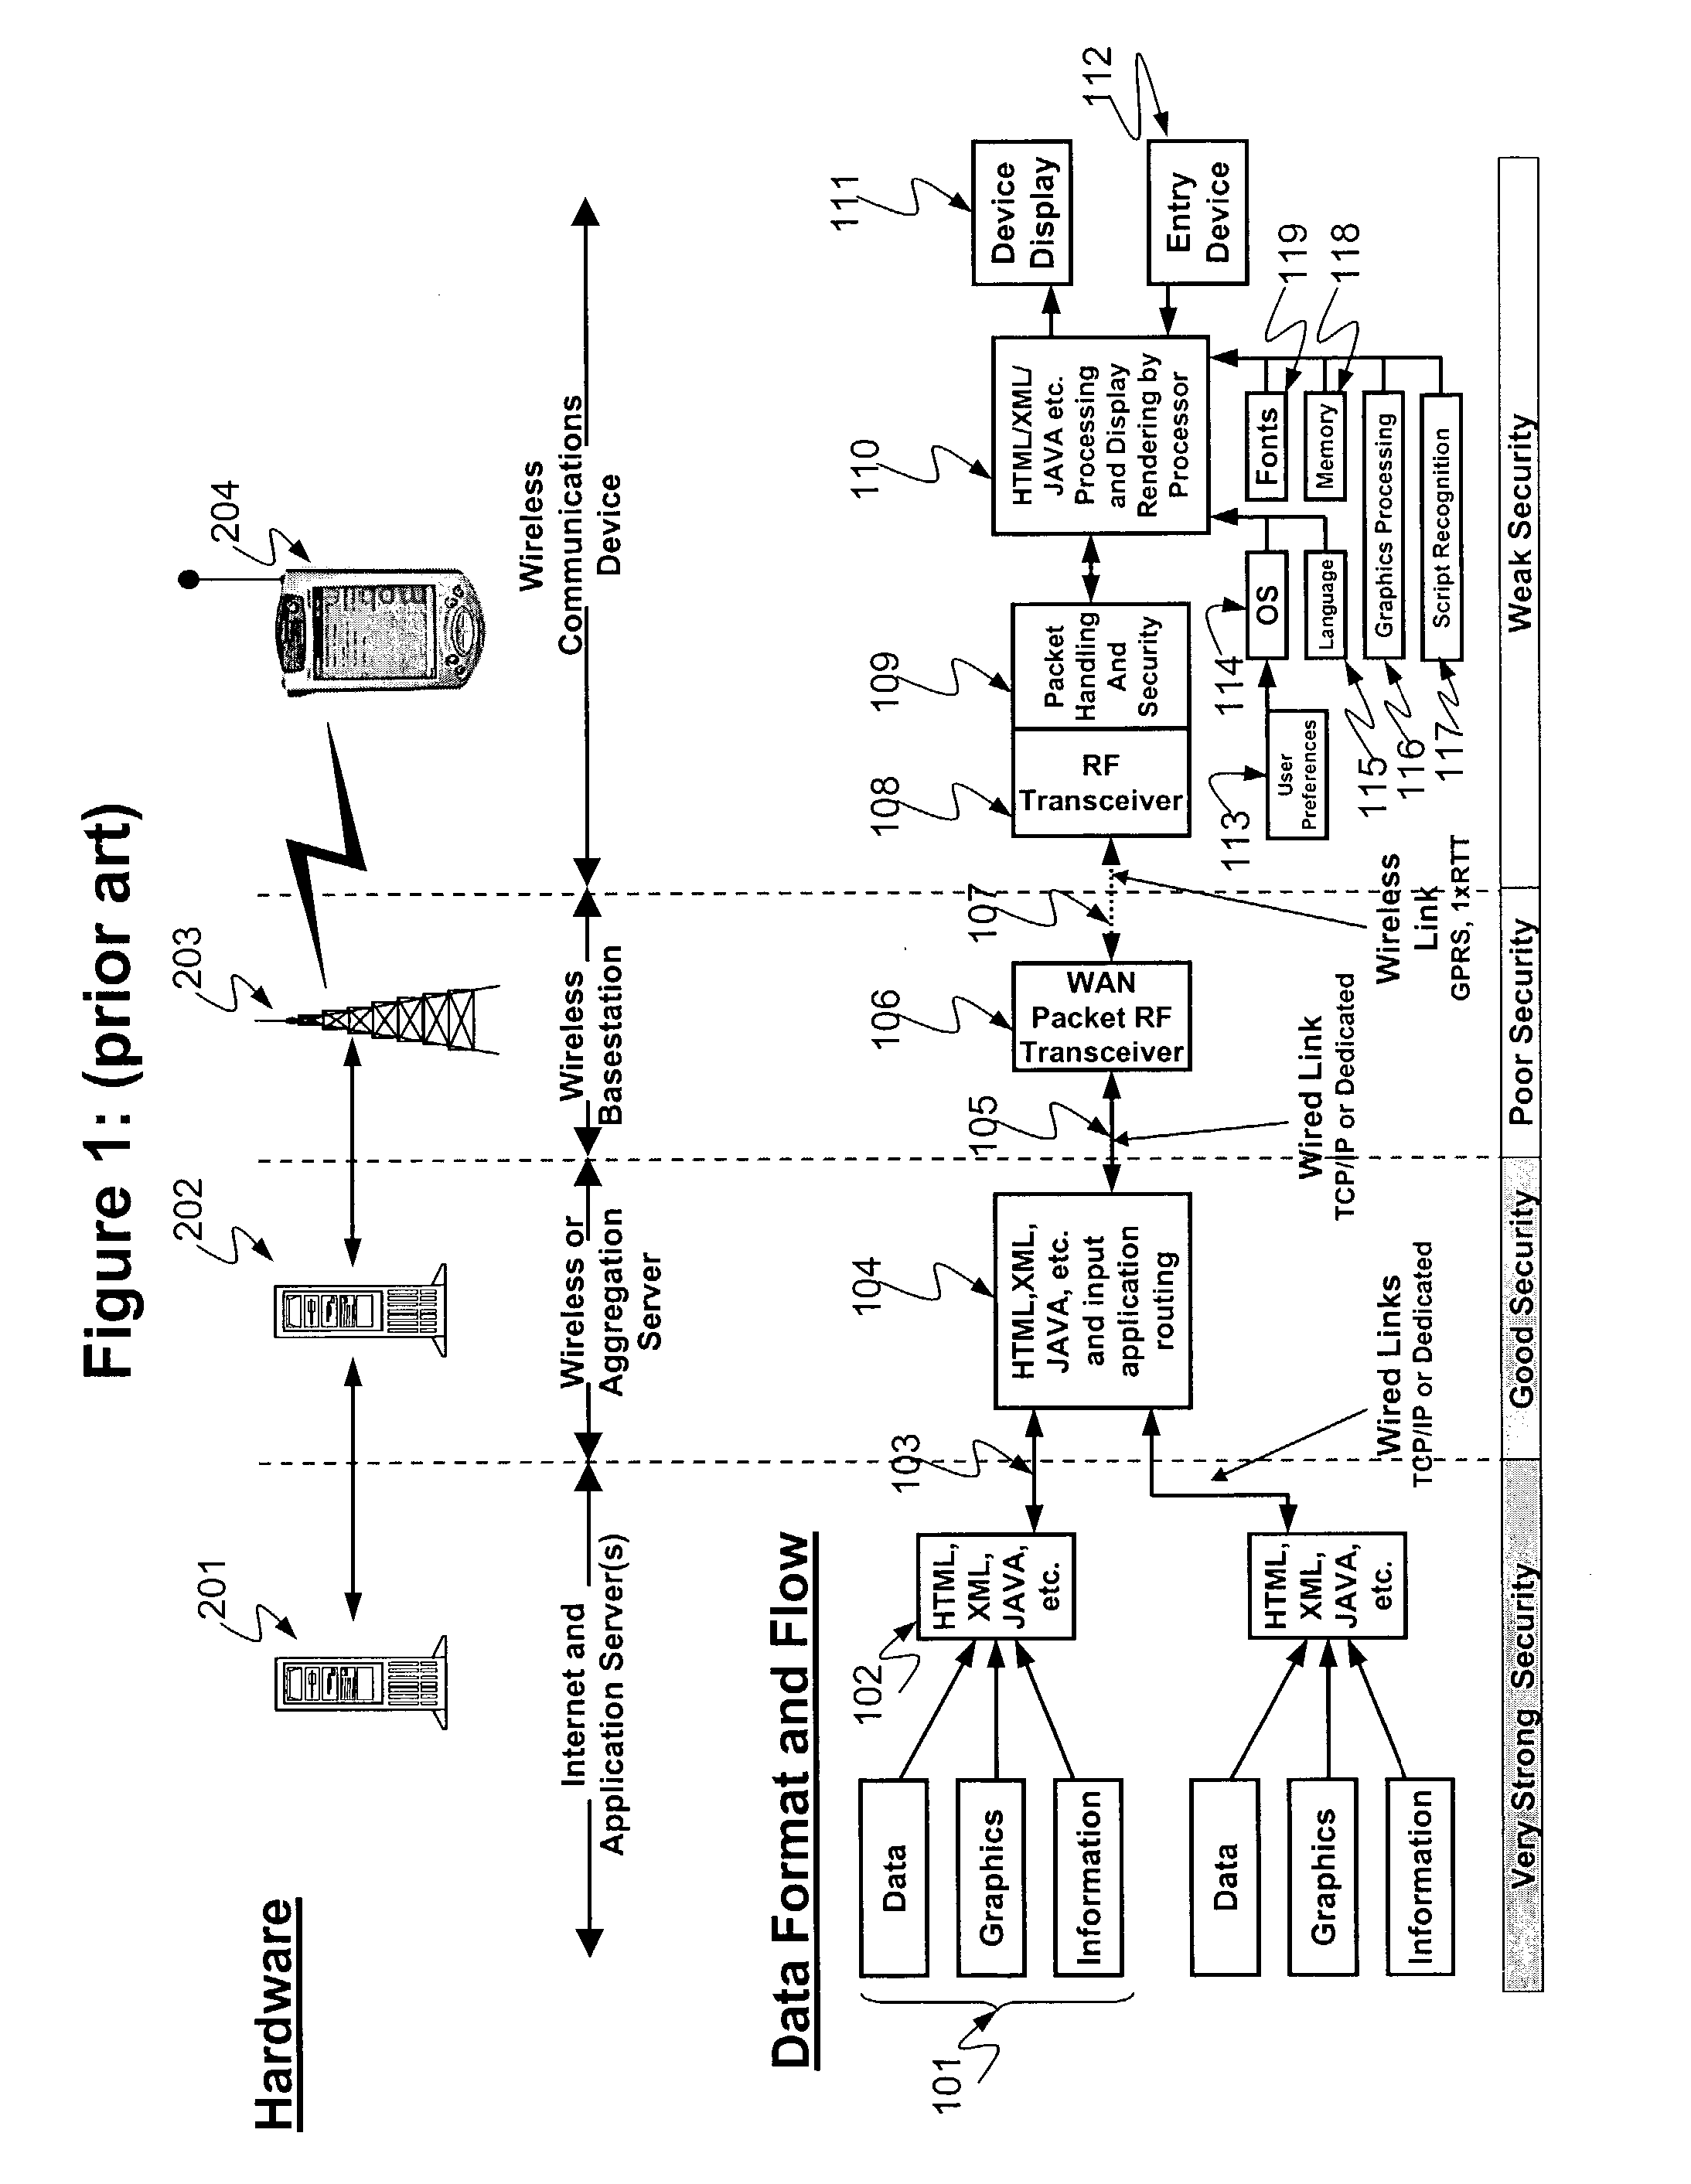 Wireless network architecture and method